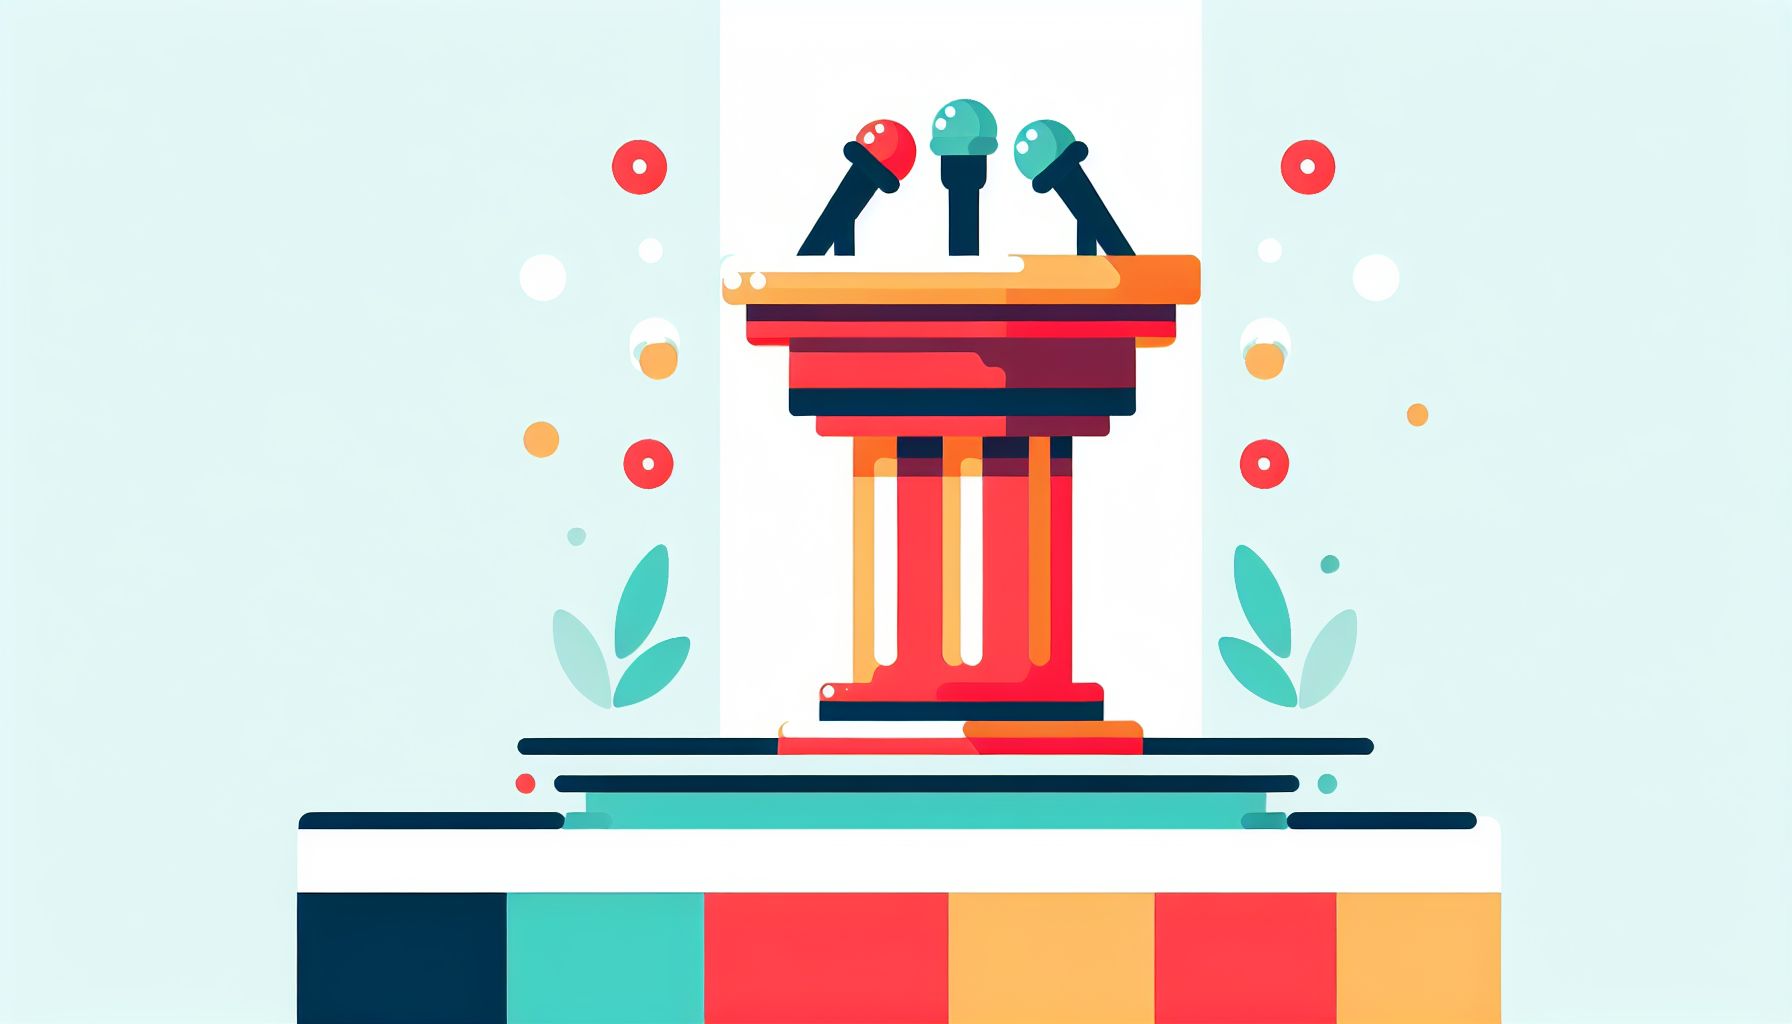 Podium in flat illustration style and white background, red #f47574, green #88c7a8, yellow #fcc44b, and blue #645bc8 colors.